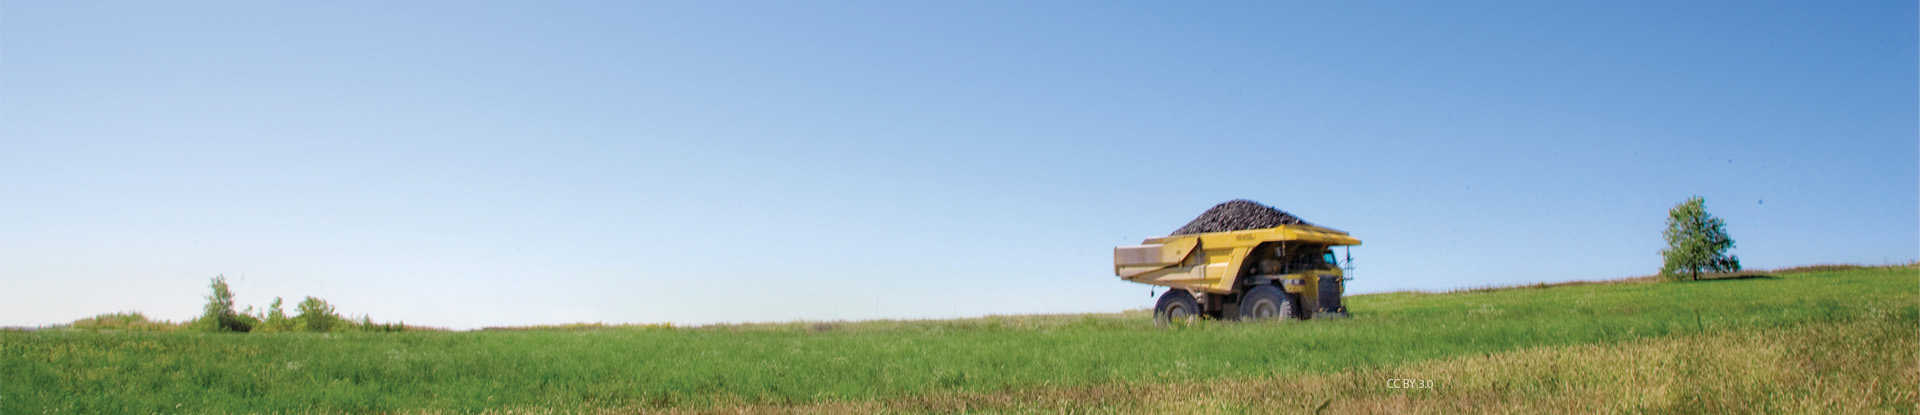 A landscape with green grass and a blue sky day with a yellow hauling truck carrying rocks cruising through the field.